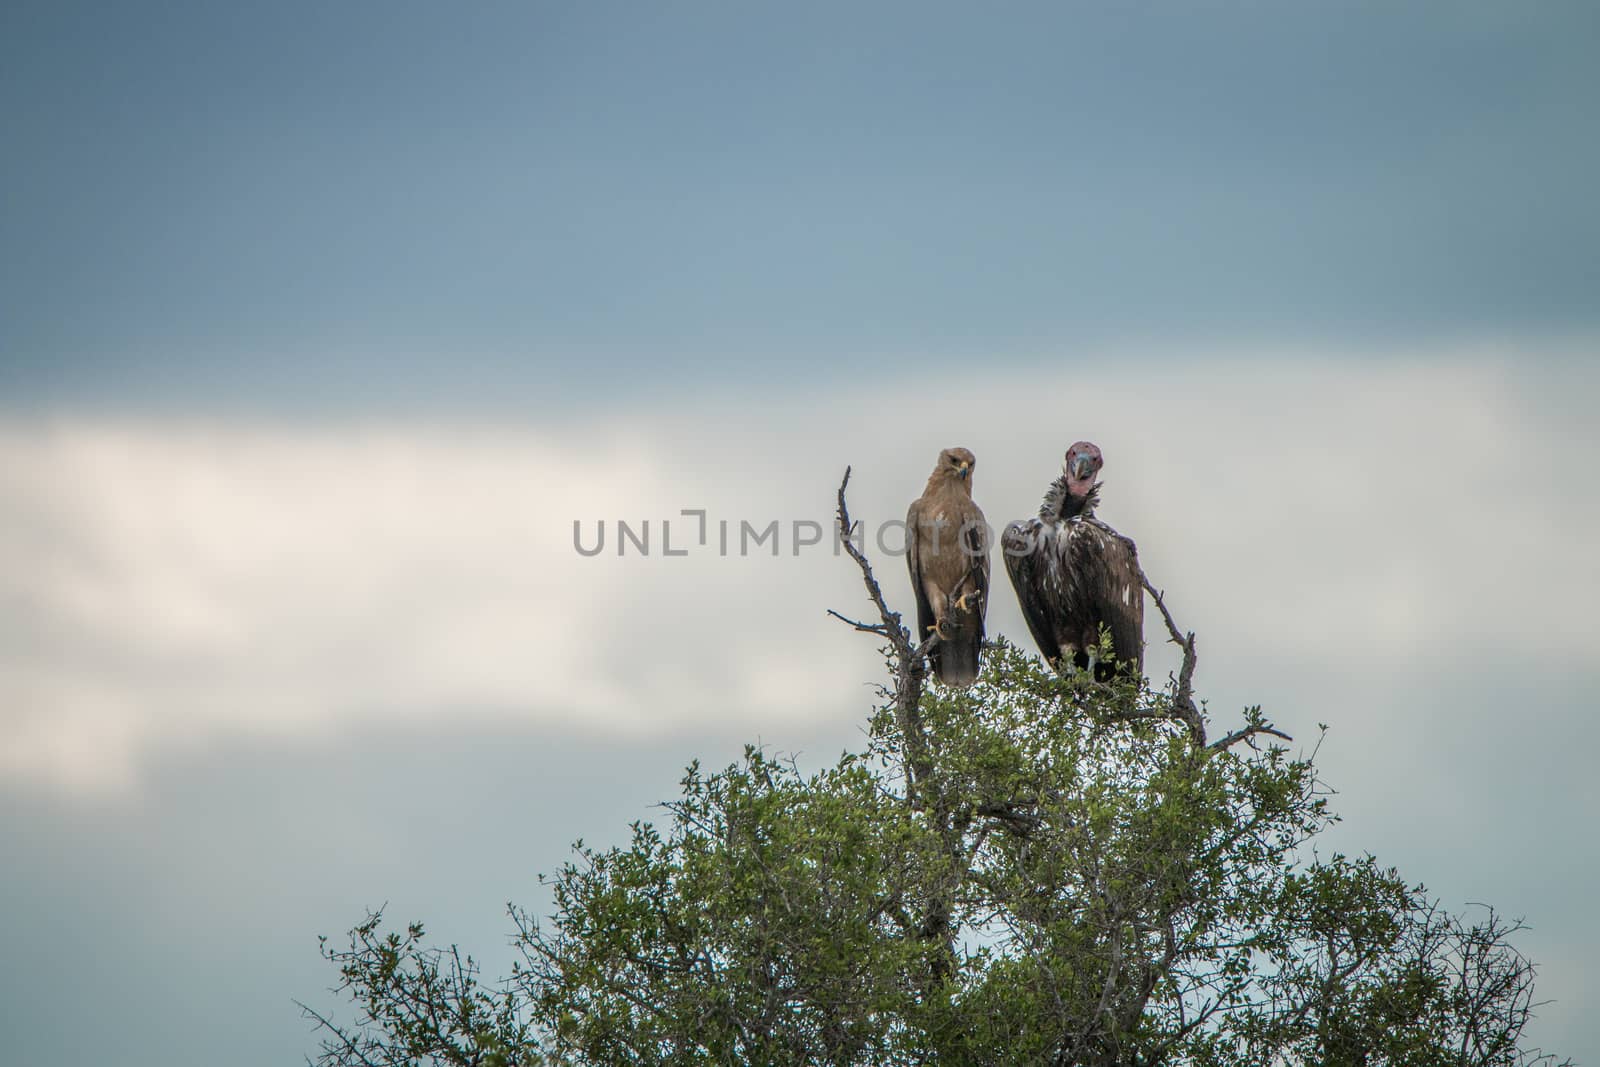 Tawny eagle and Lappet-faced vulture in a tree in the Kruger National Park by Simoneemanphotography